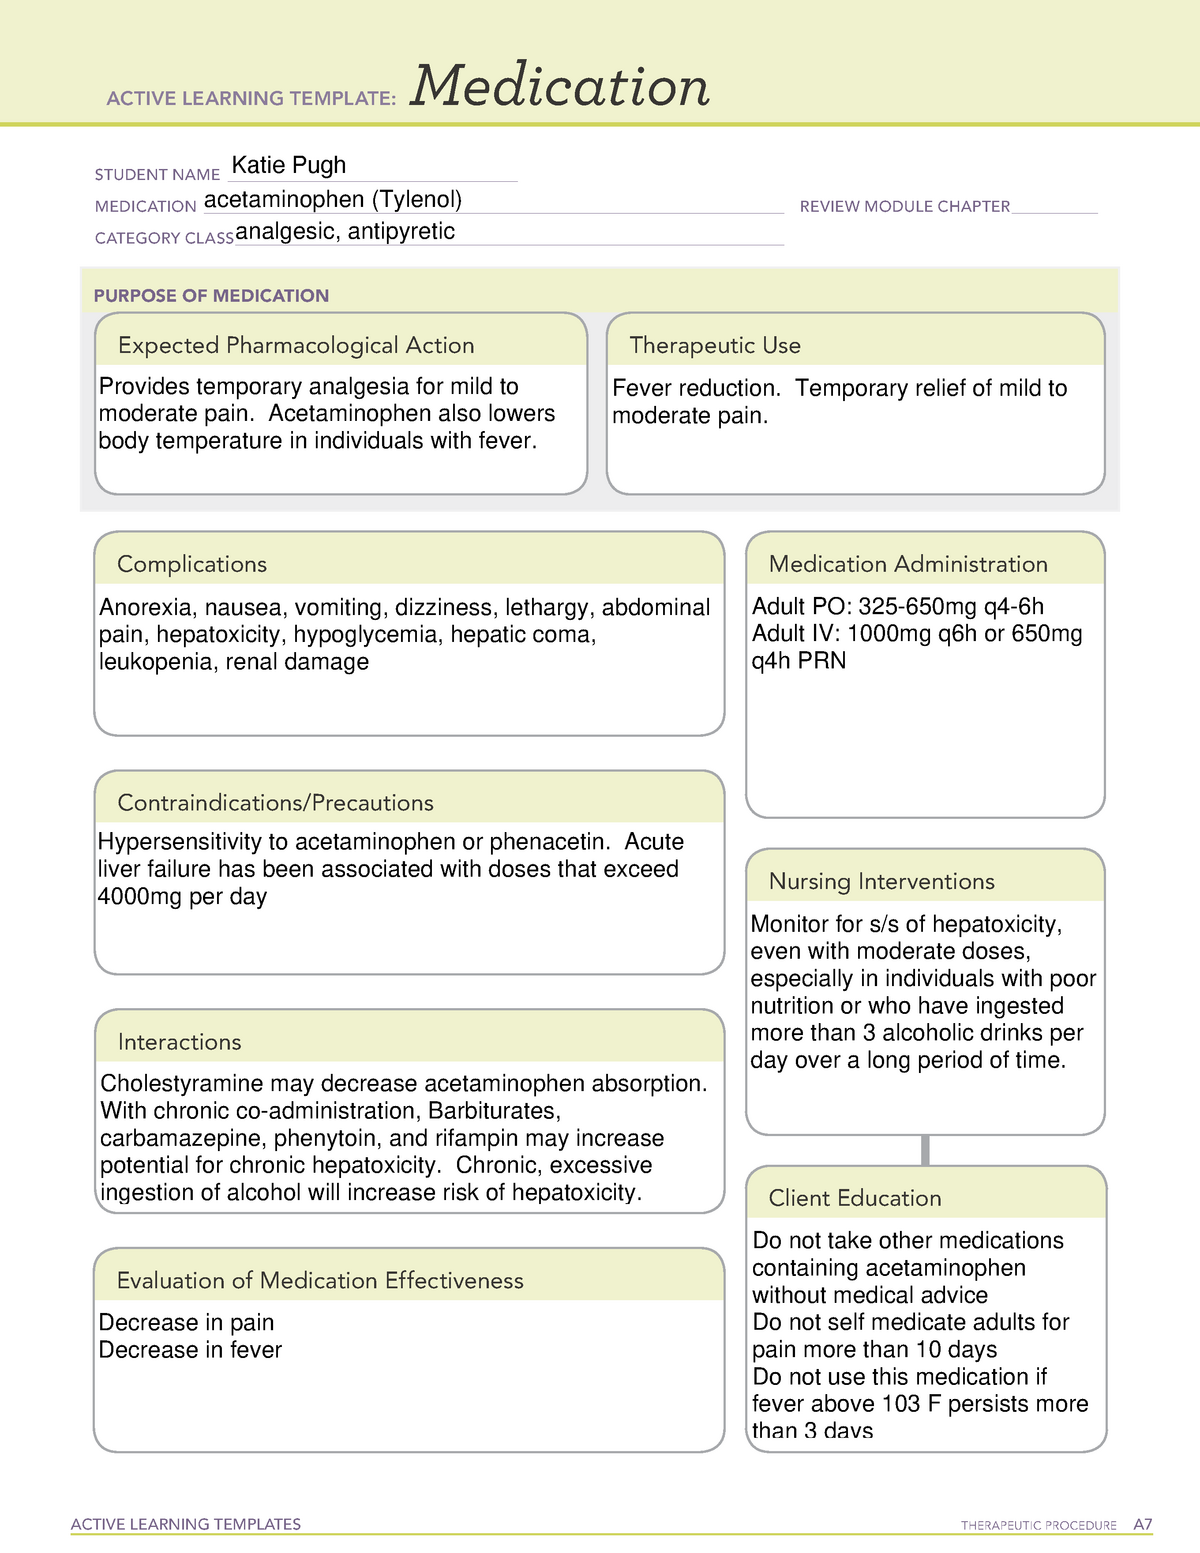 ati-acetaminophen-active-learning-template-active-learning-templates-therapeutic-procedure-a